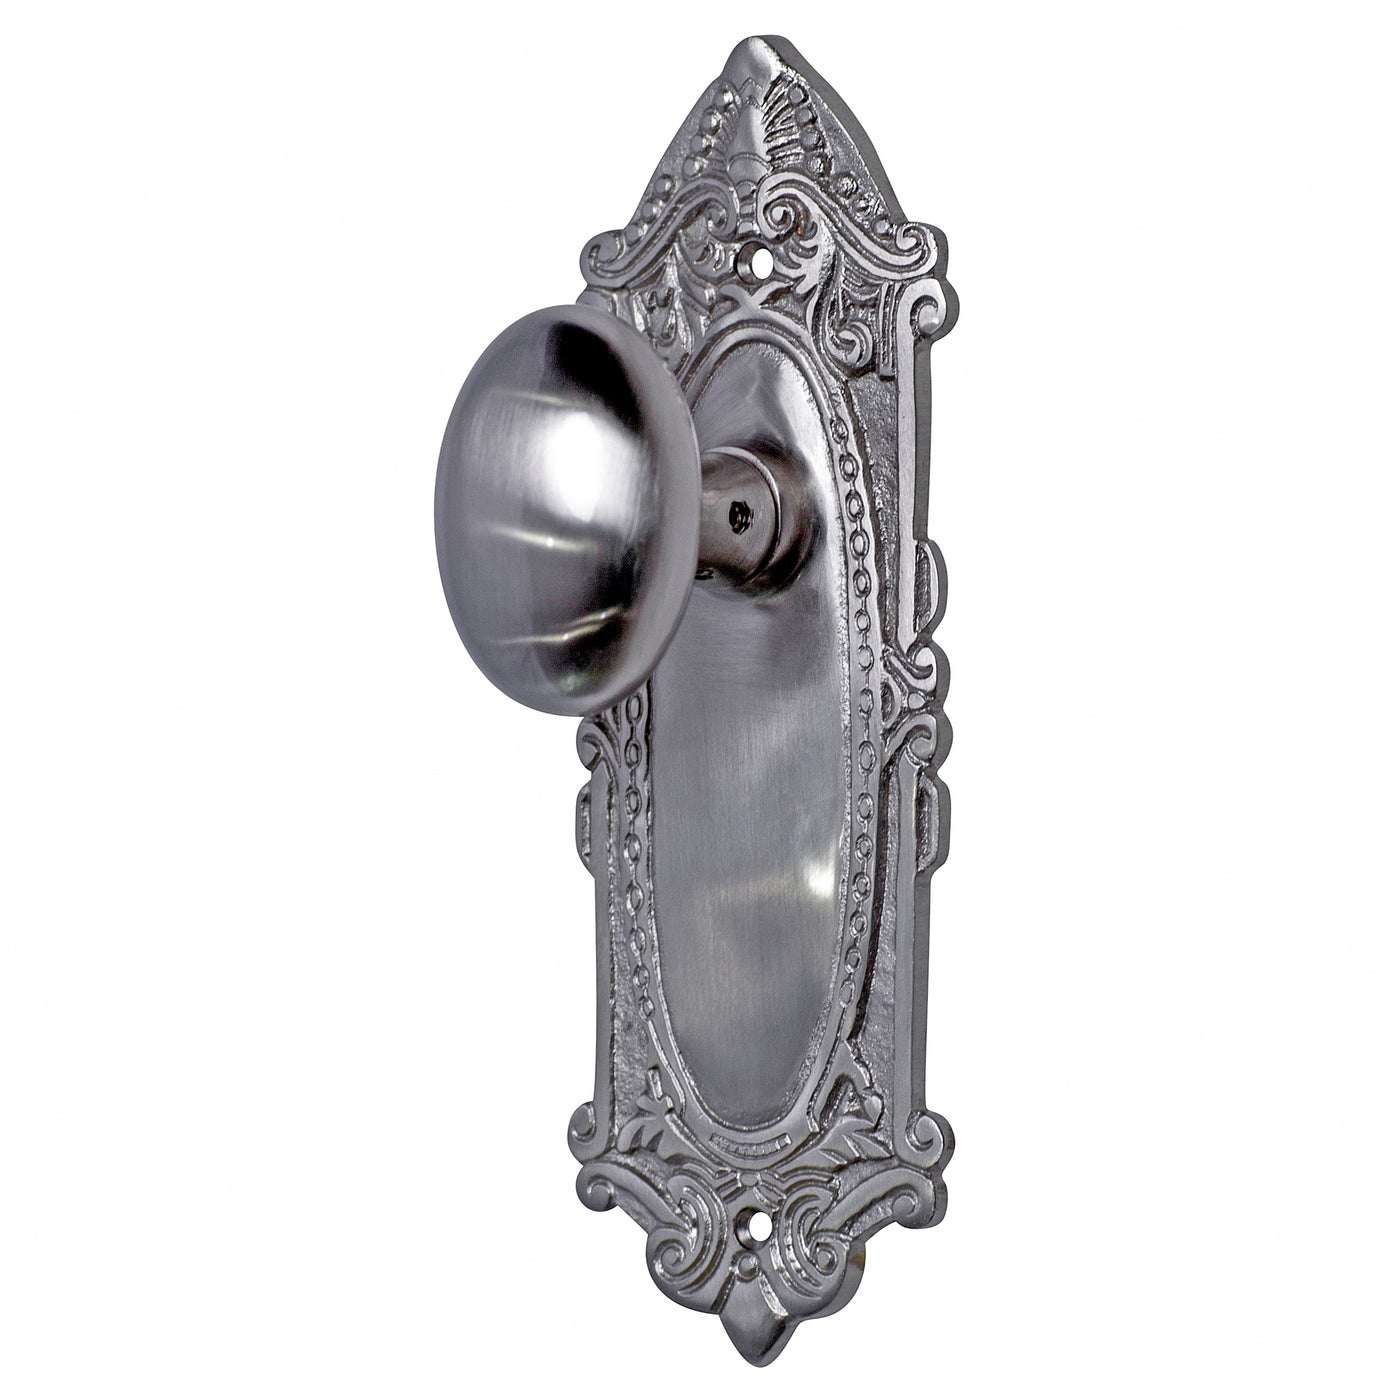 Solid Brass Egg Antique Style Door Knob Set with Ornate Victorian Plate